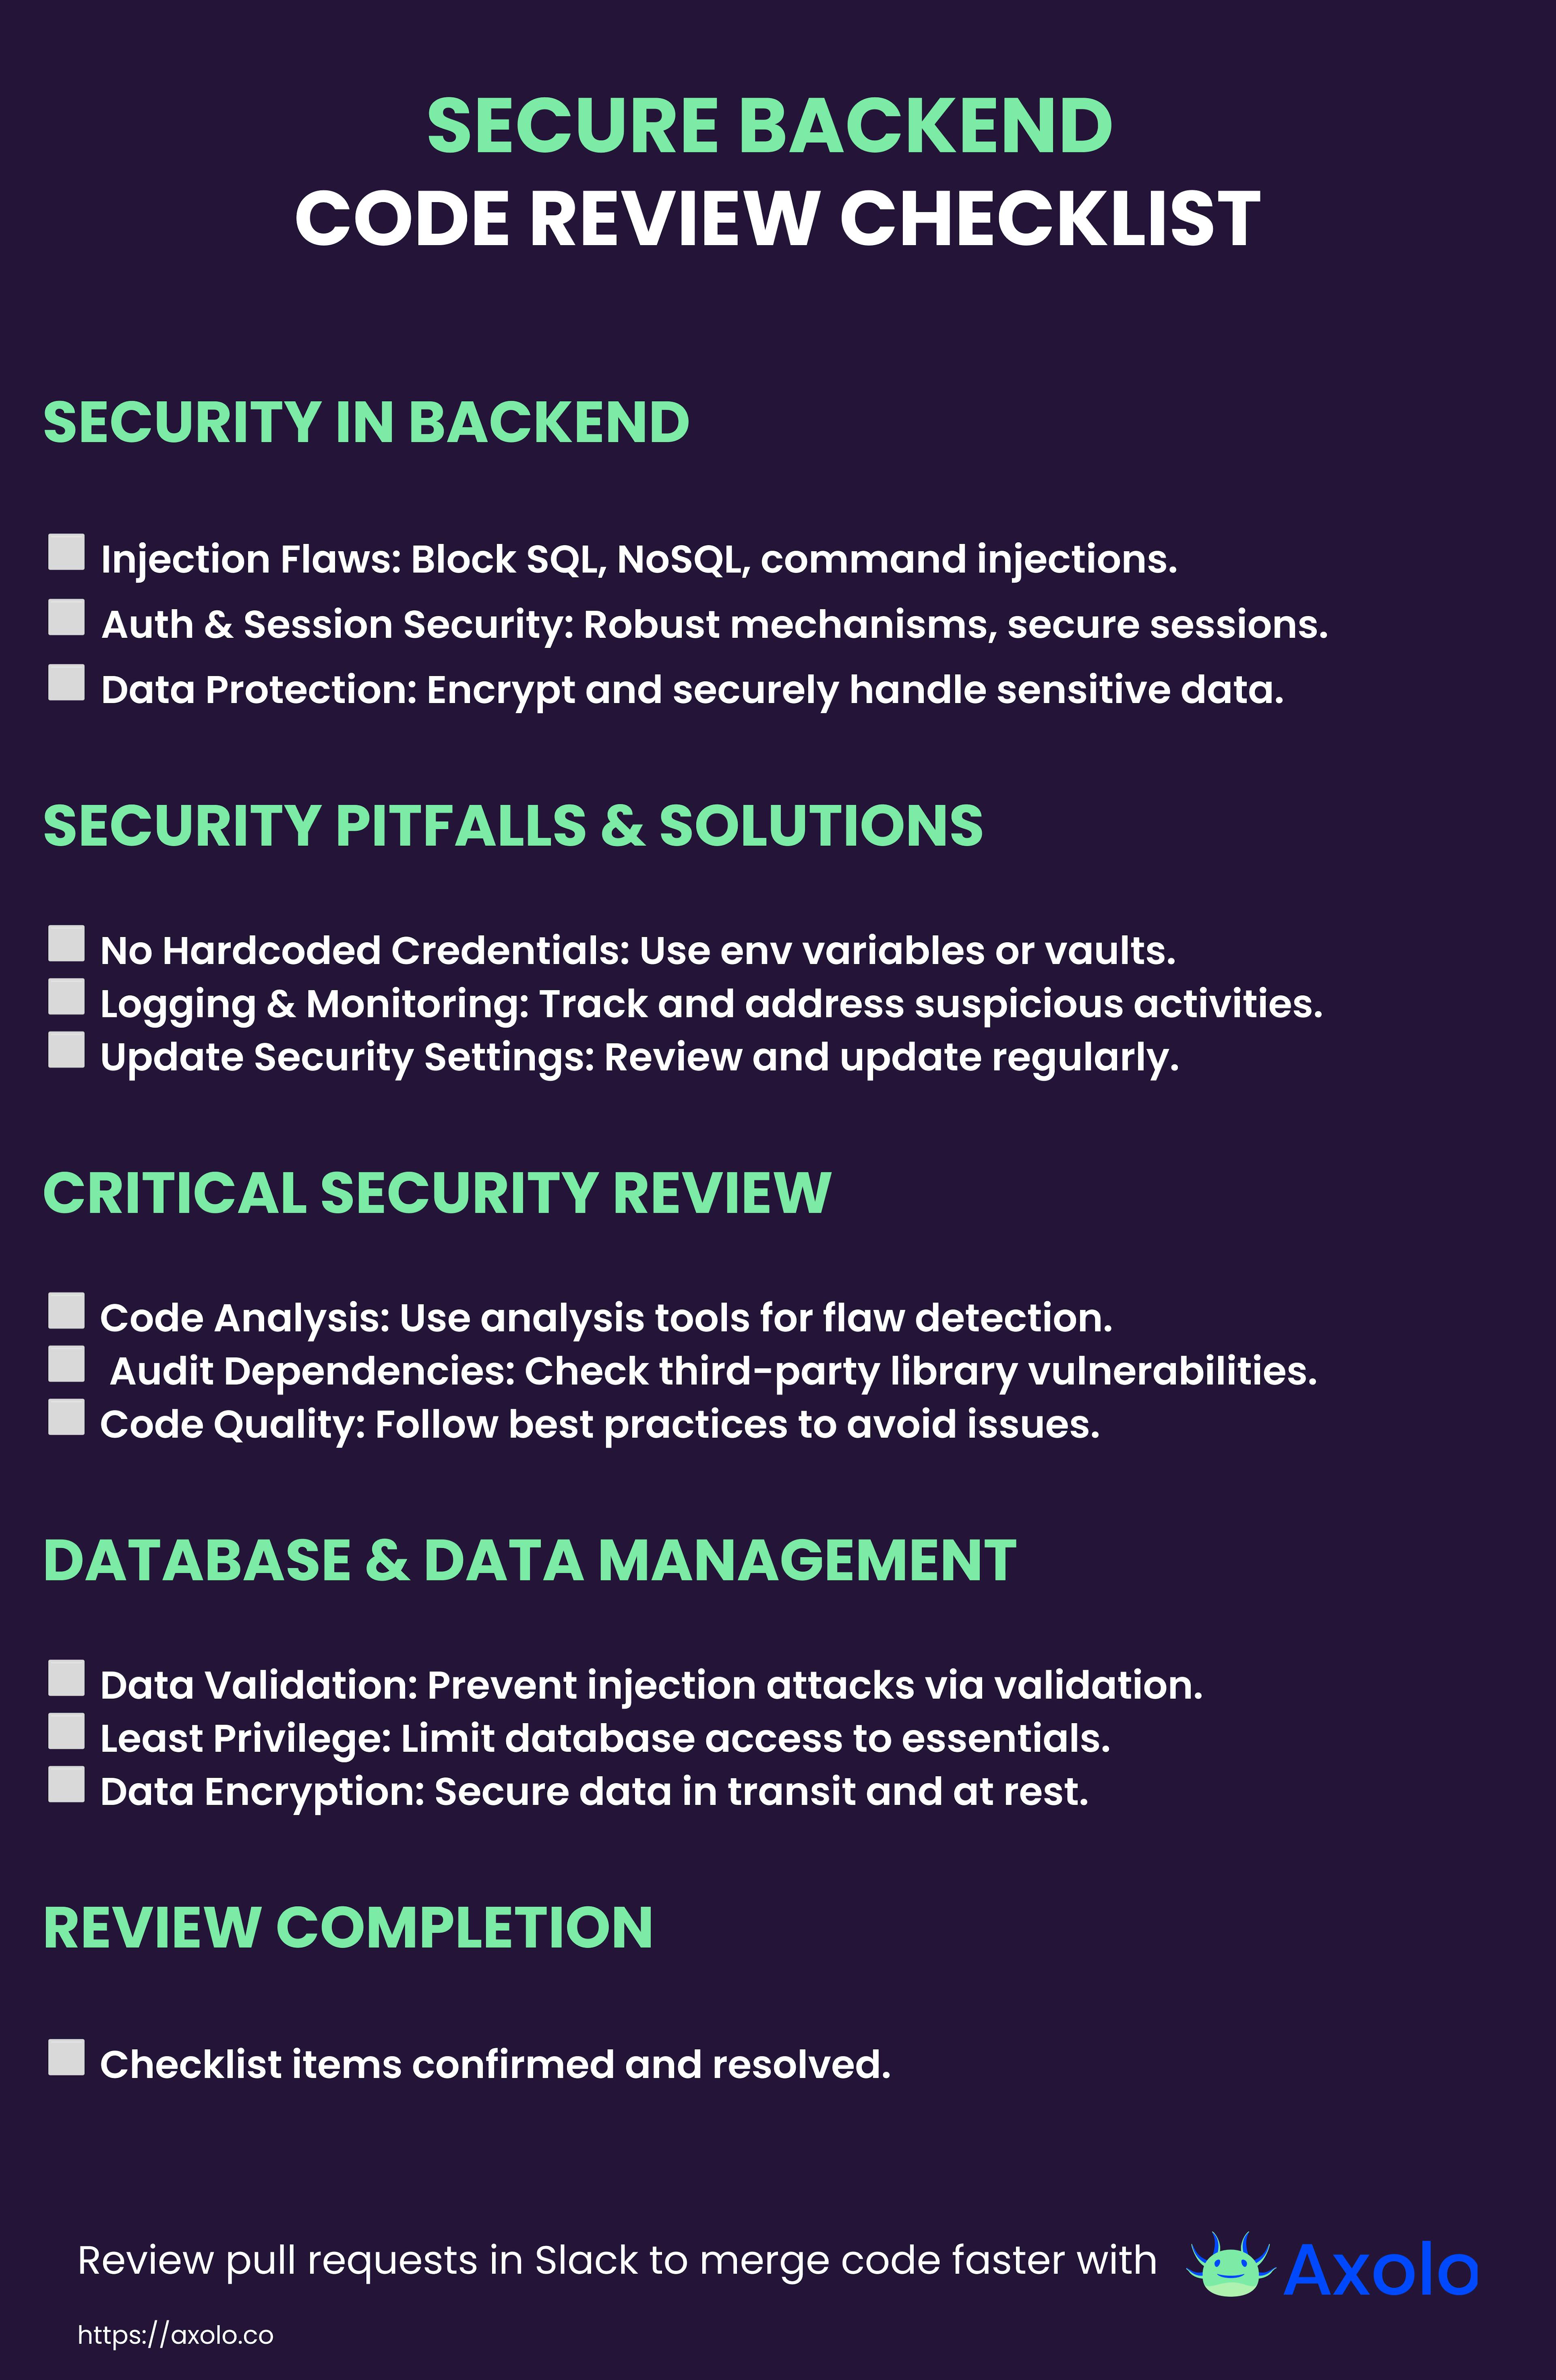 Secure Backend code review checklist